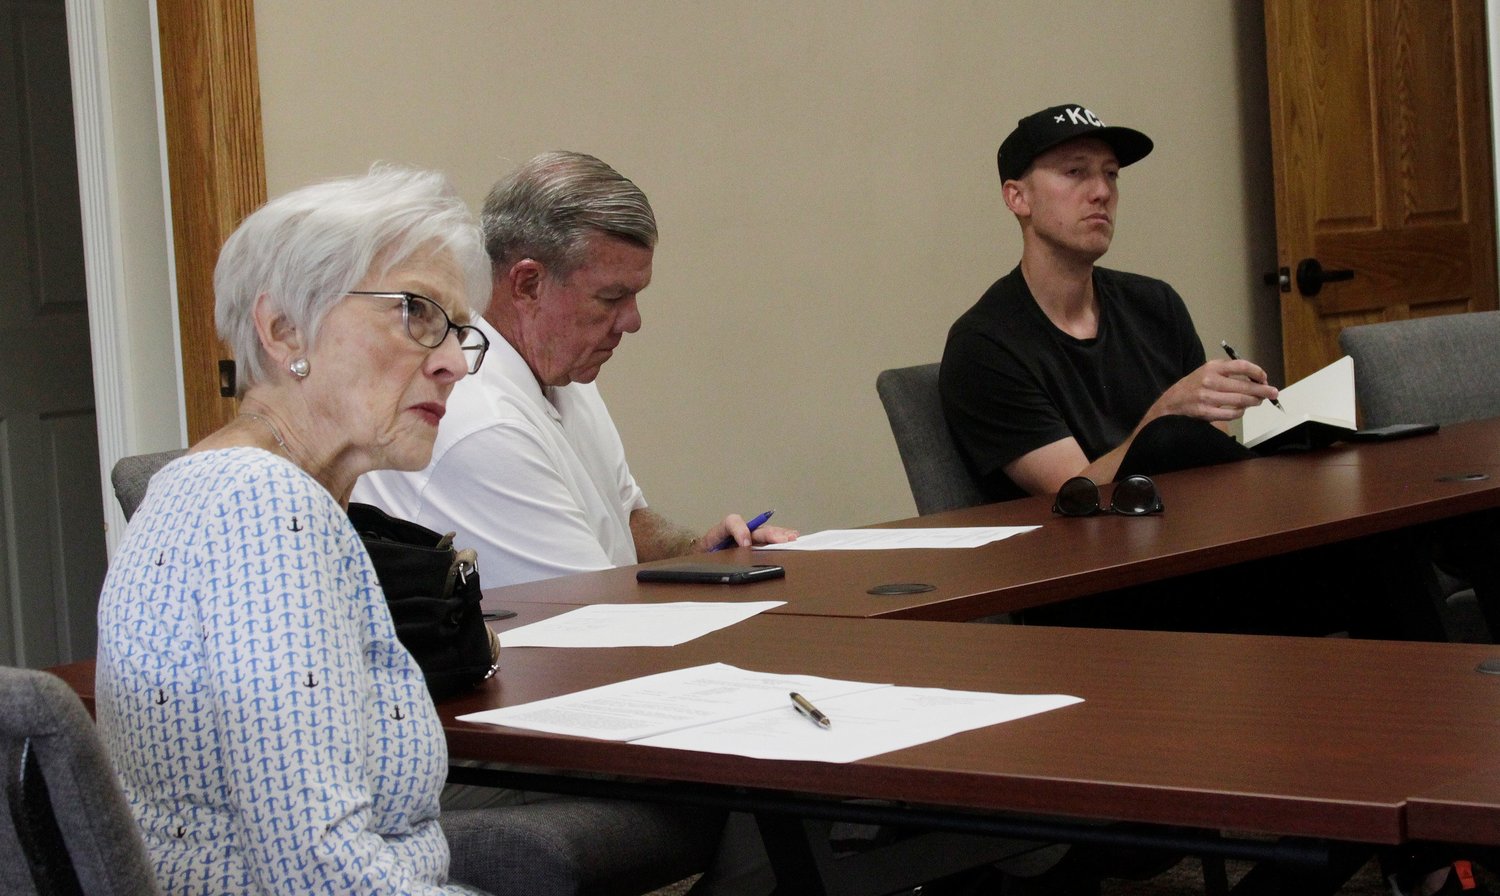 Moberly Historic Preservation Committee members Sara Fleming, left, and Adam Flock, right, listen to a presentation made while Doug Sharp takes notes during a July 13 public business meeting held at the Municipal Building in downtown Moberly.